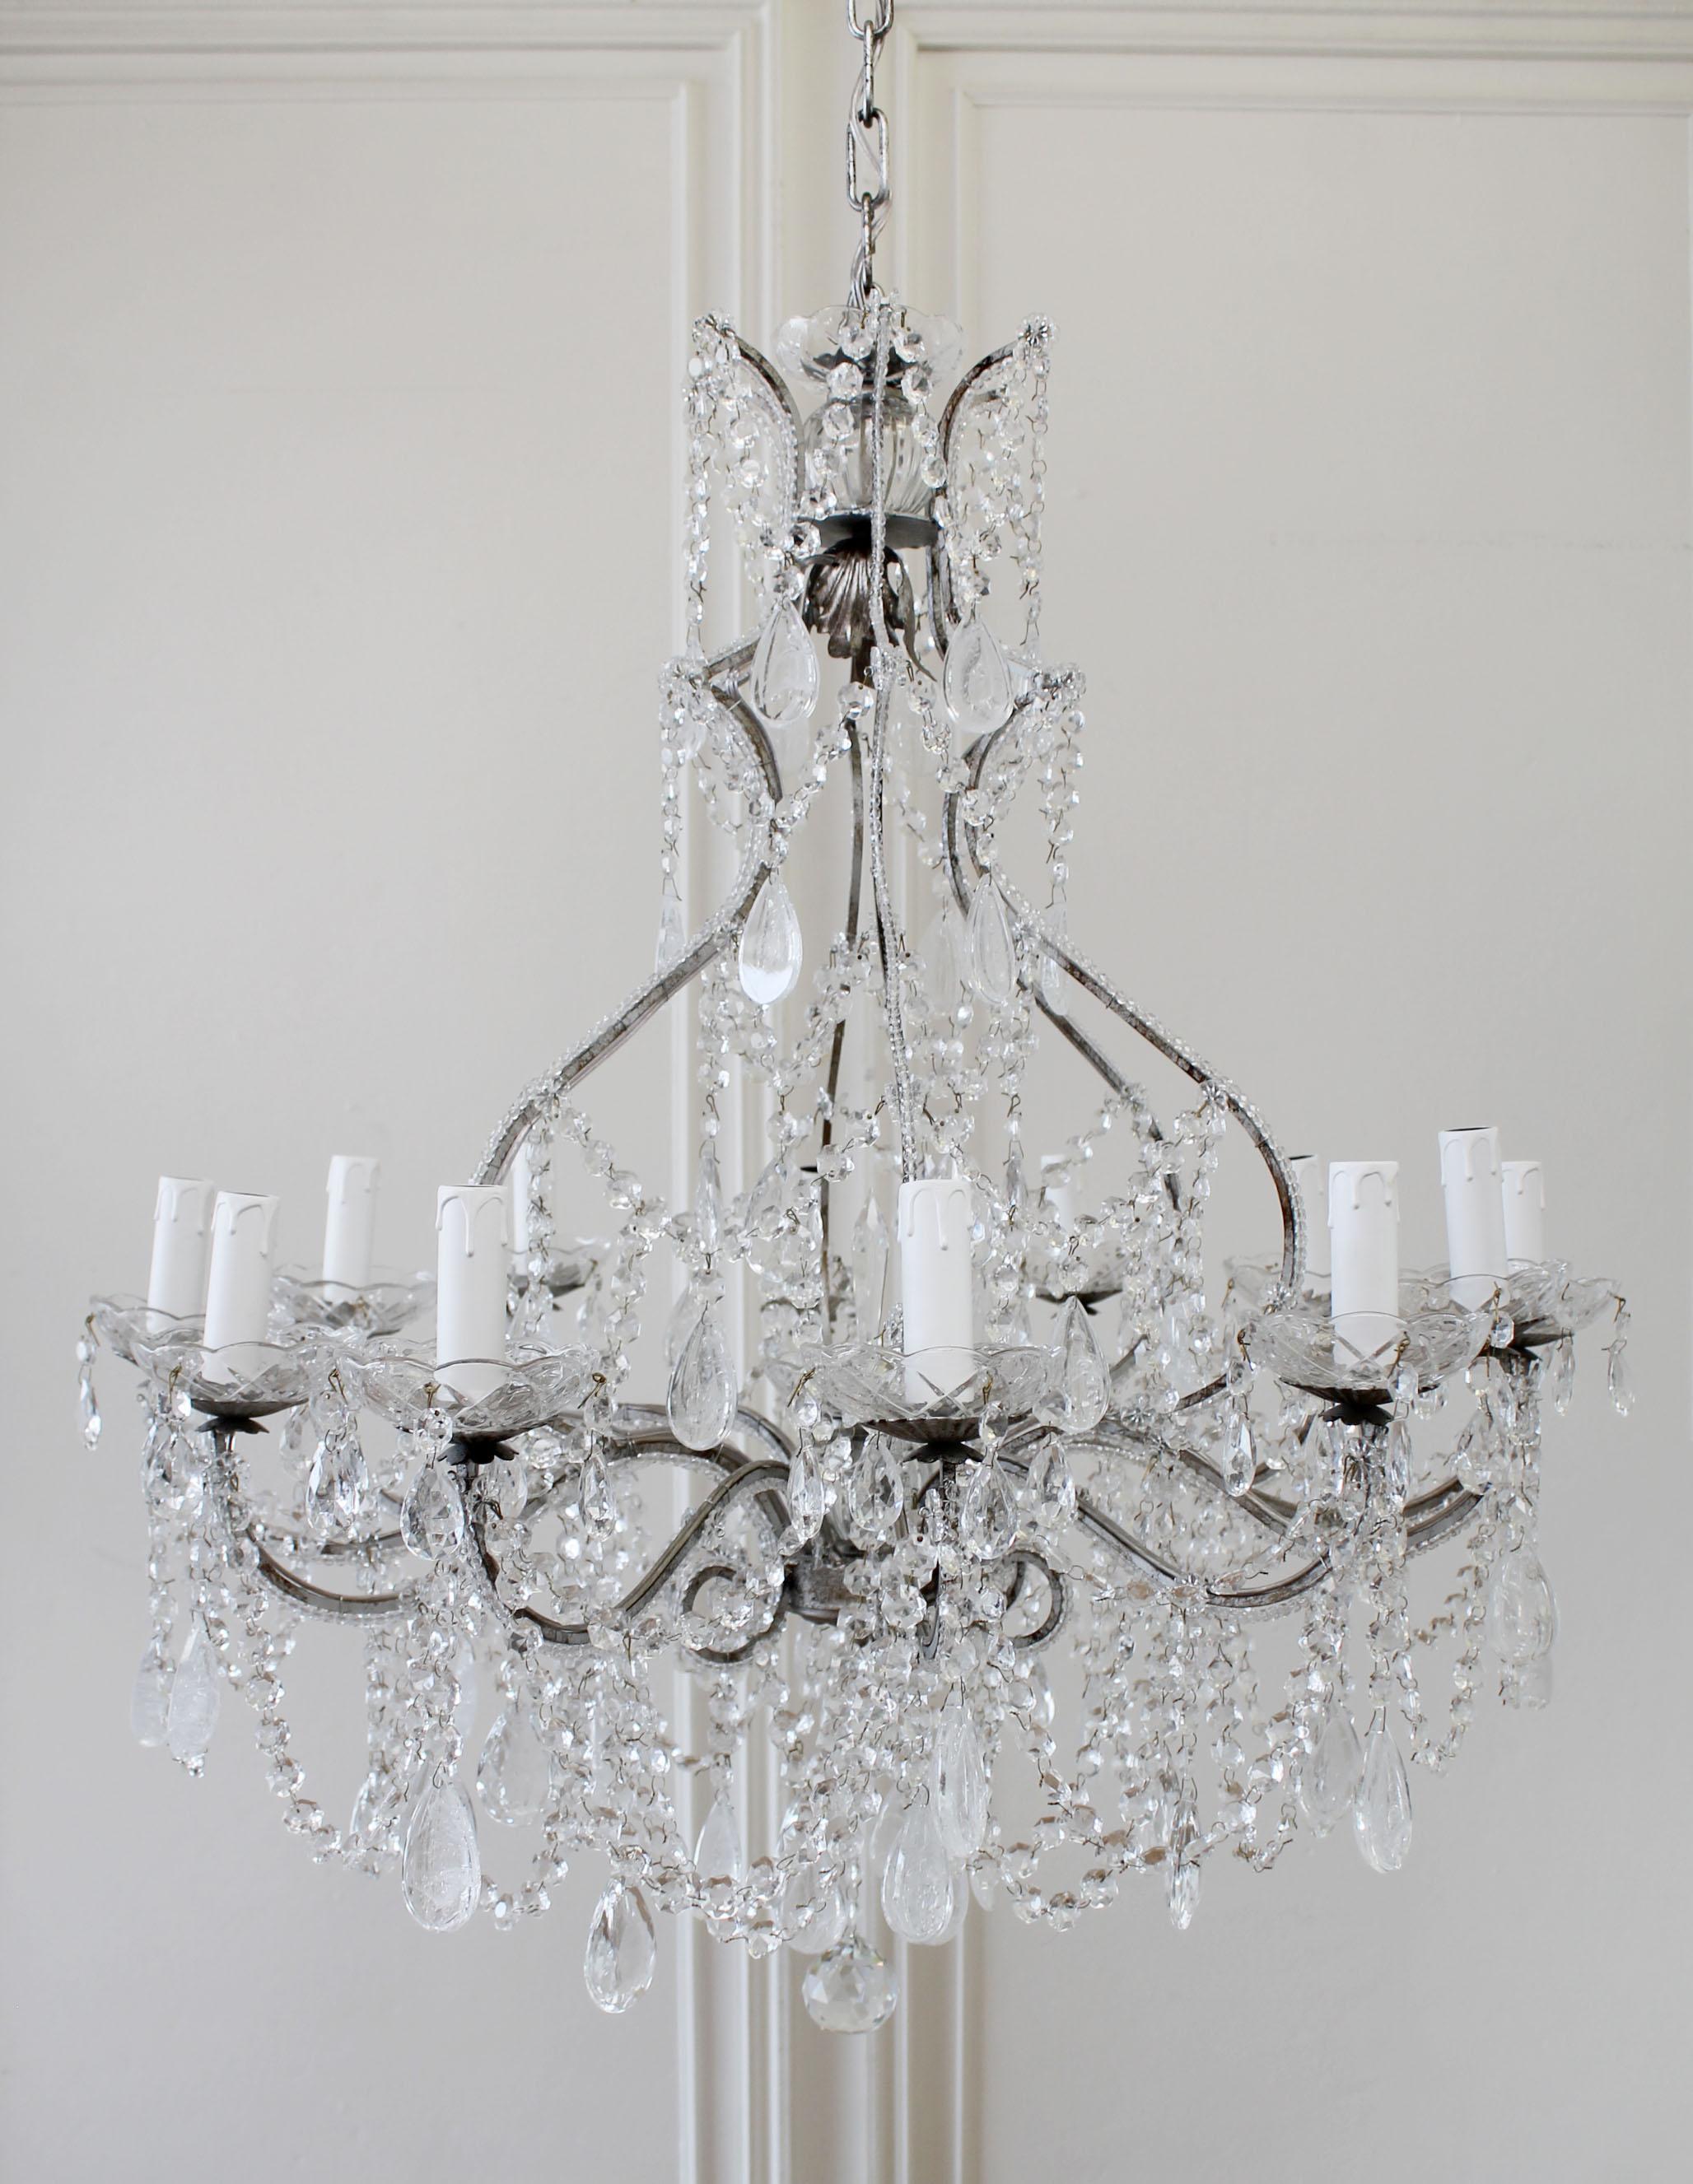 Antique reproduction Italian chandelier with beaded arms and rock style crystals
These are part of our new collection for Full Bloom Cottage. We've recreated a new line of vintage inspired chandeliers, all custom and hand made in Italy with a rock